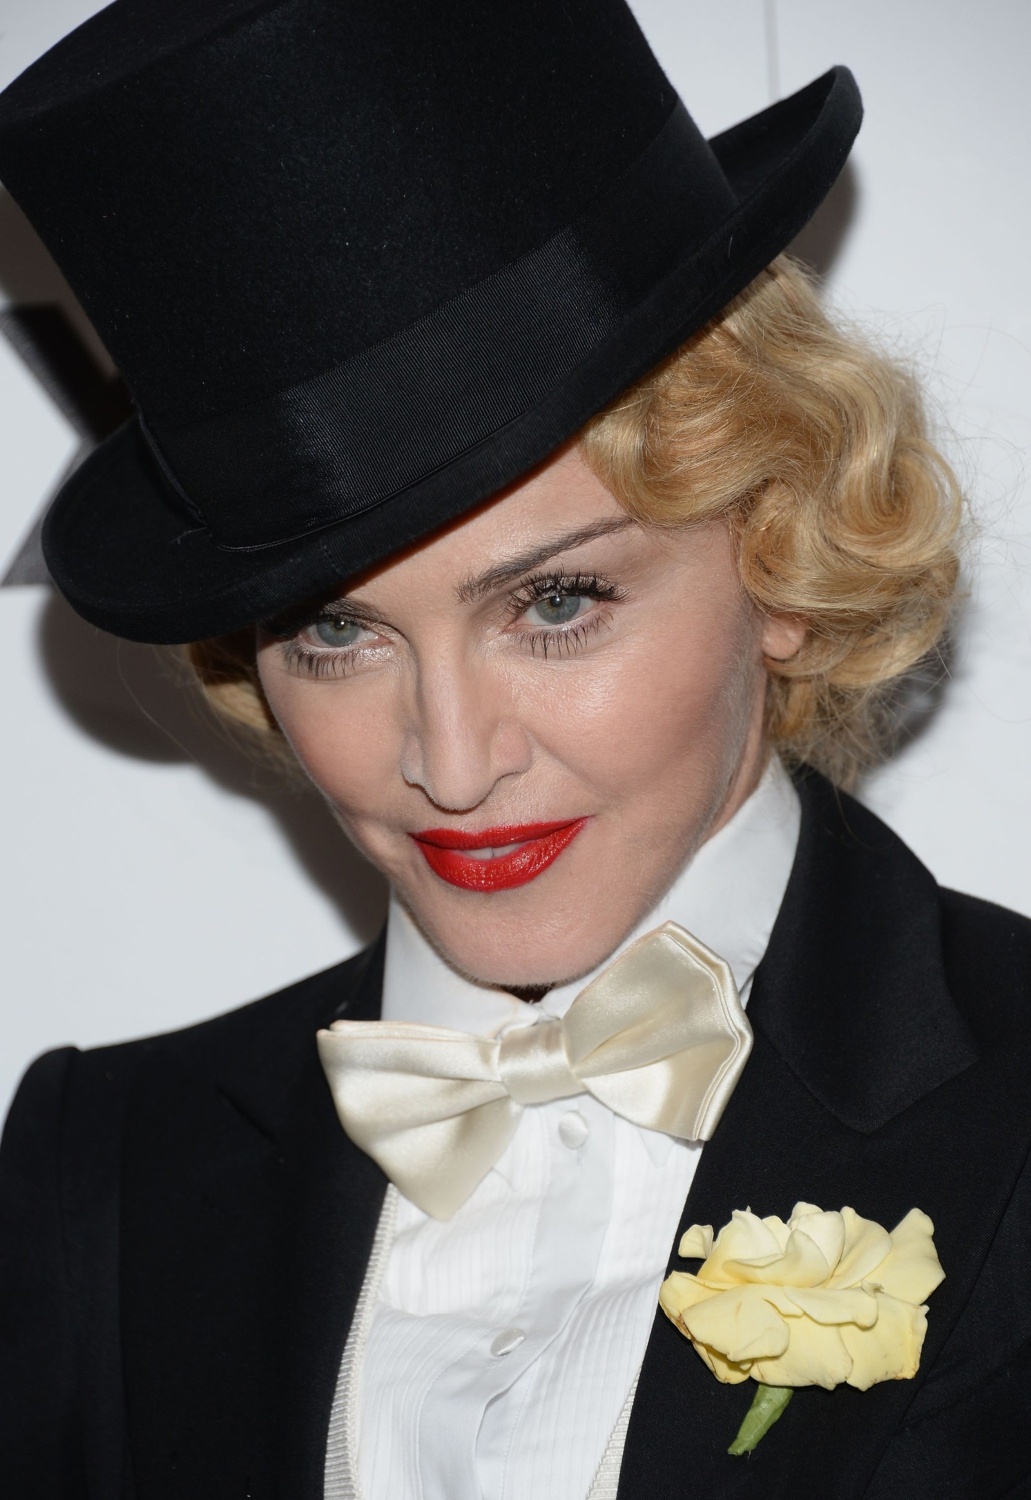 20130619-pictures-madonna-mdna-tour-premiere-screening-hq-05.jpg